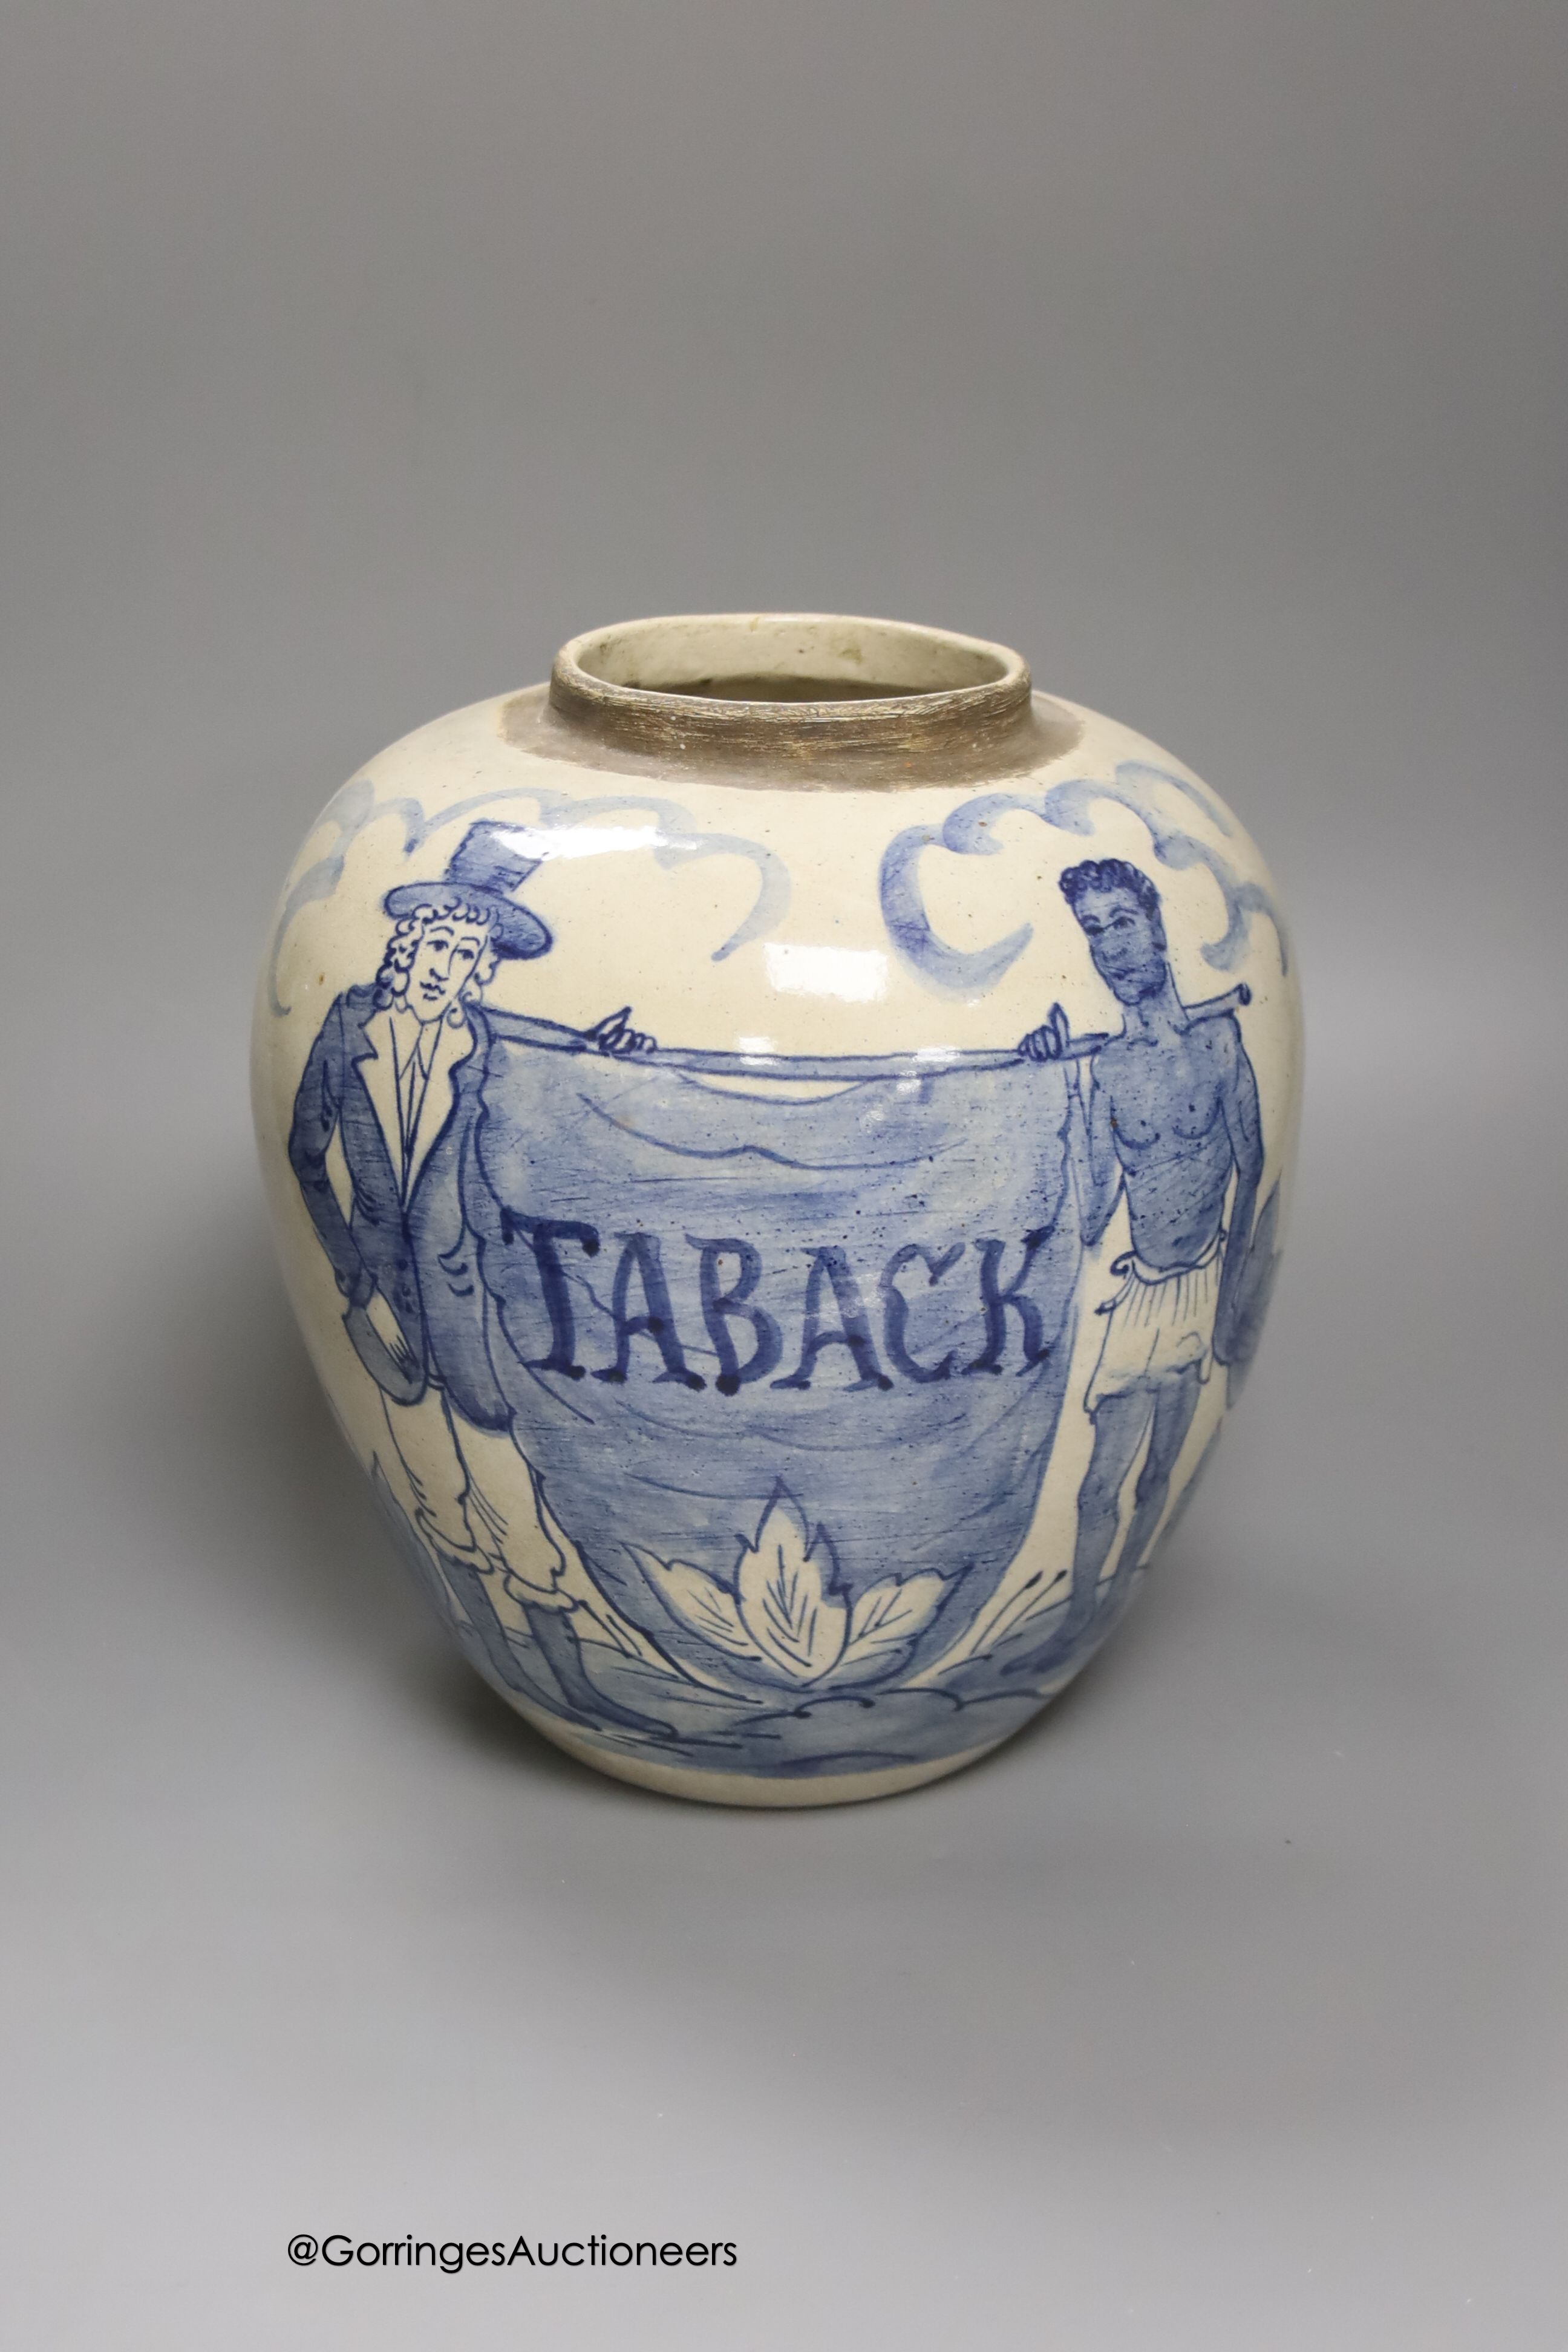 A tin-glazed terracotta barber's bowl dated 1819, a large ovoid eathenware ‘Taback’ jar and three earthenware jugs